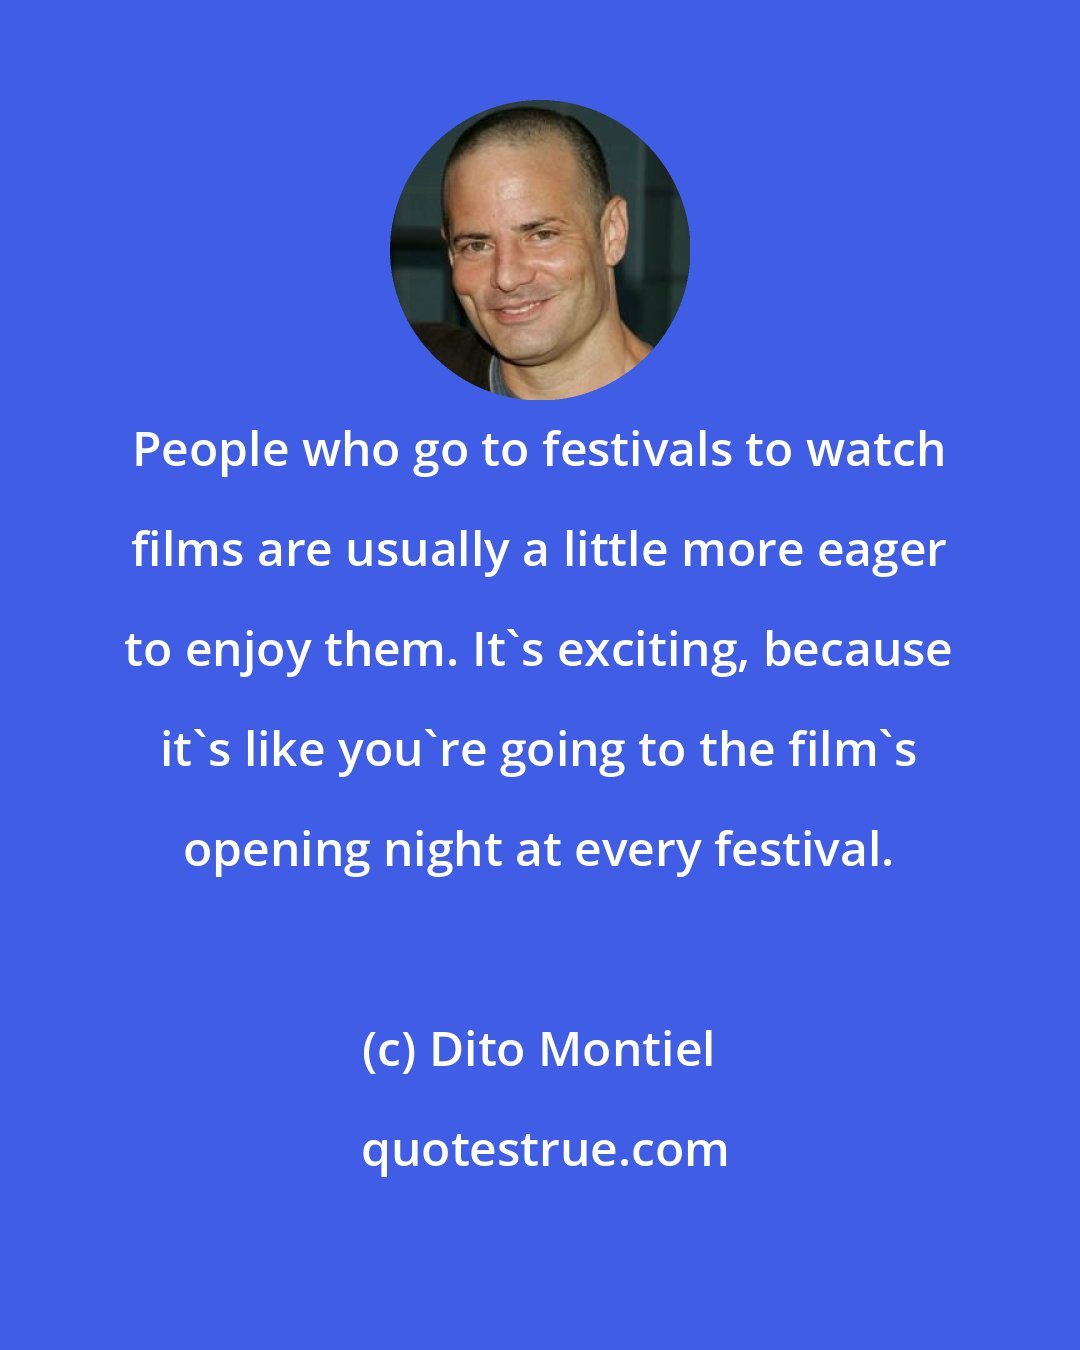 Dito Montiel: People who go to festivals to watch films are usually a little more eager to enjoy them. It's exciting, because it's like you're going to the film's opening night at every festival.